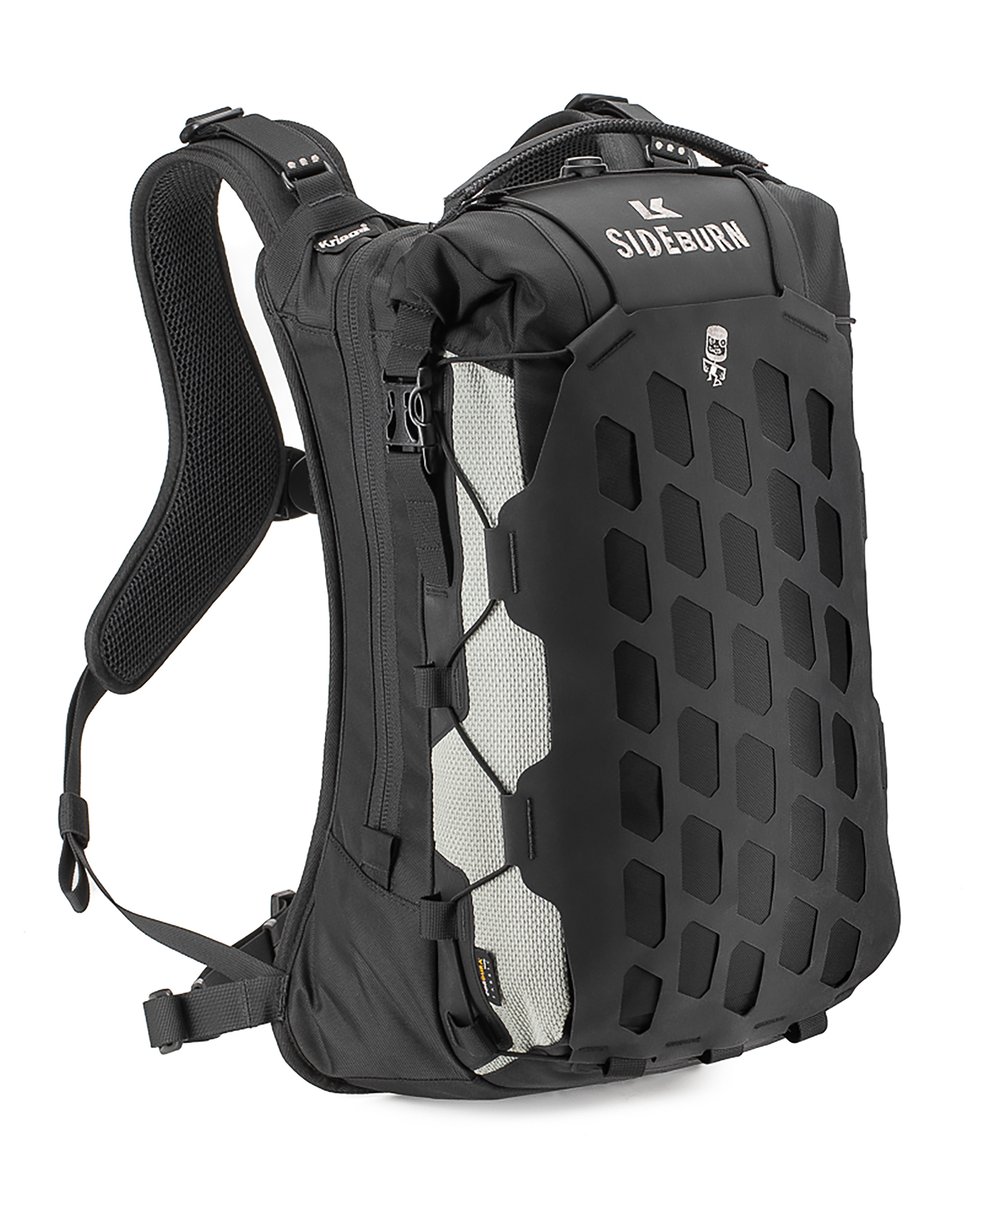 Image of Sideburn x Kriega Limited Edition T18 Backpack 